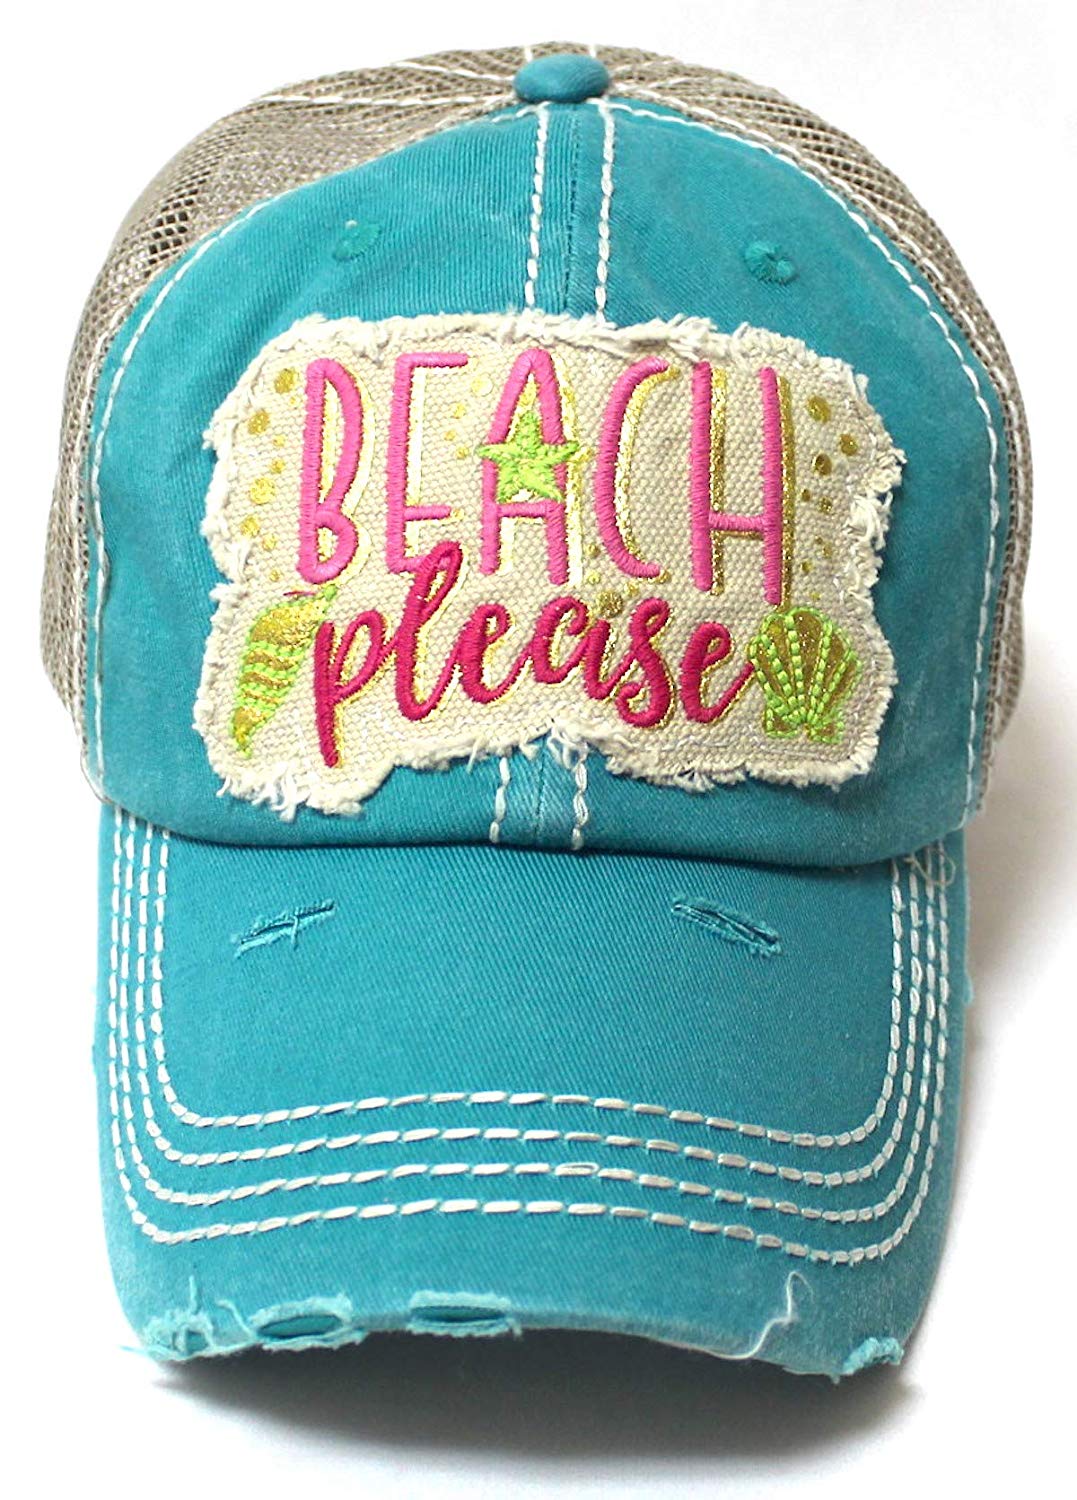 Women's Vintage Trucker Hat Beach Please Patch Embroidery Graphic, Tur ...